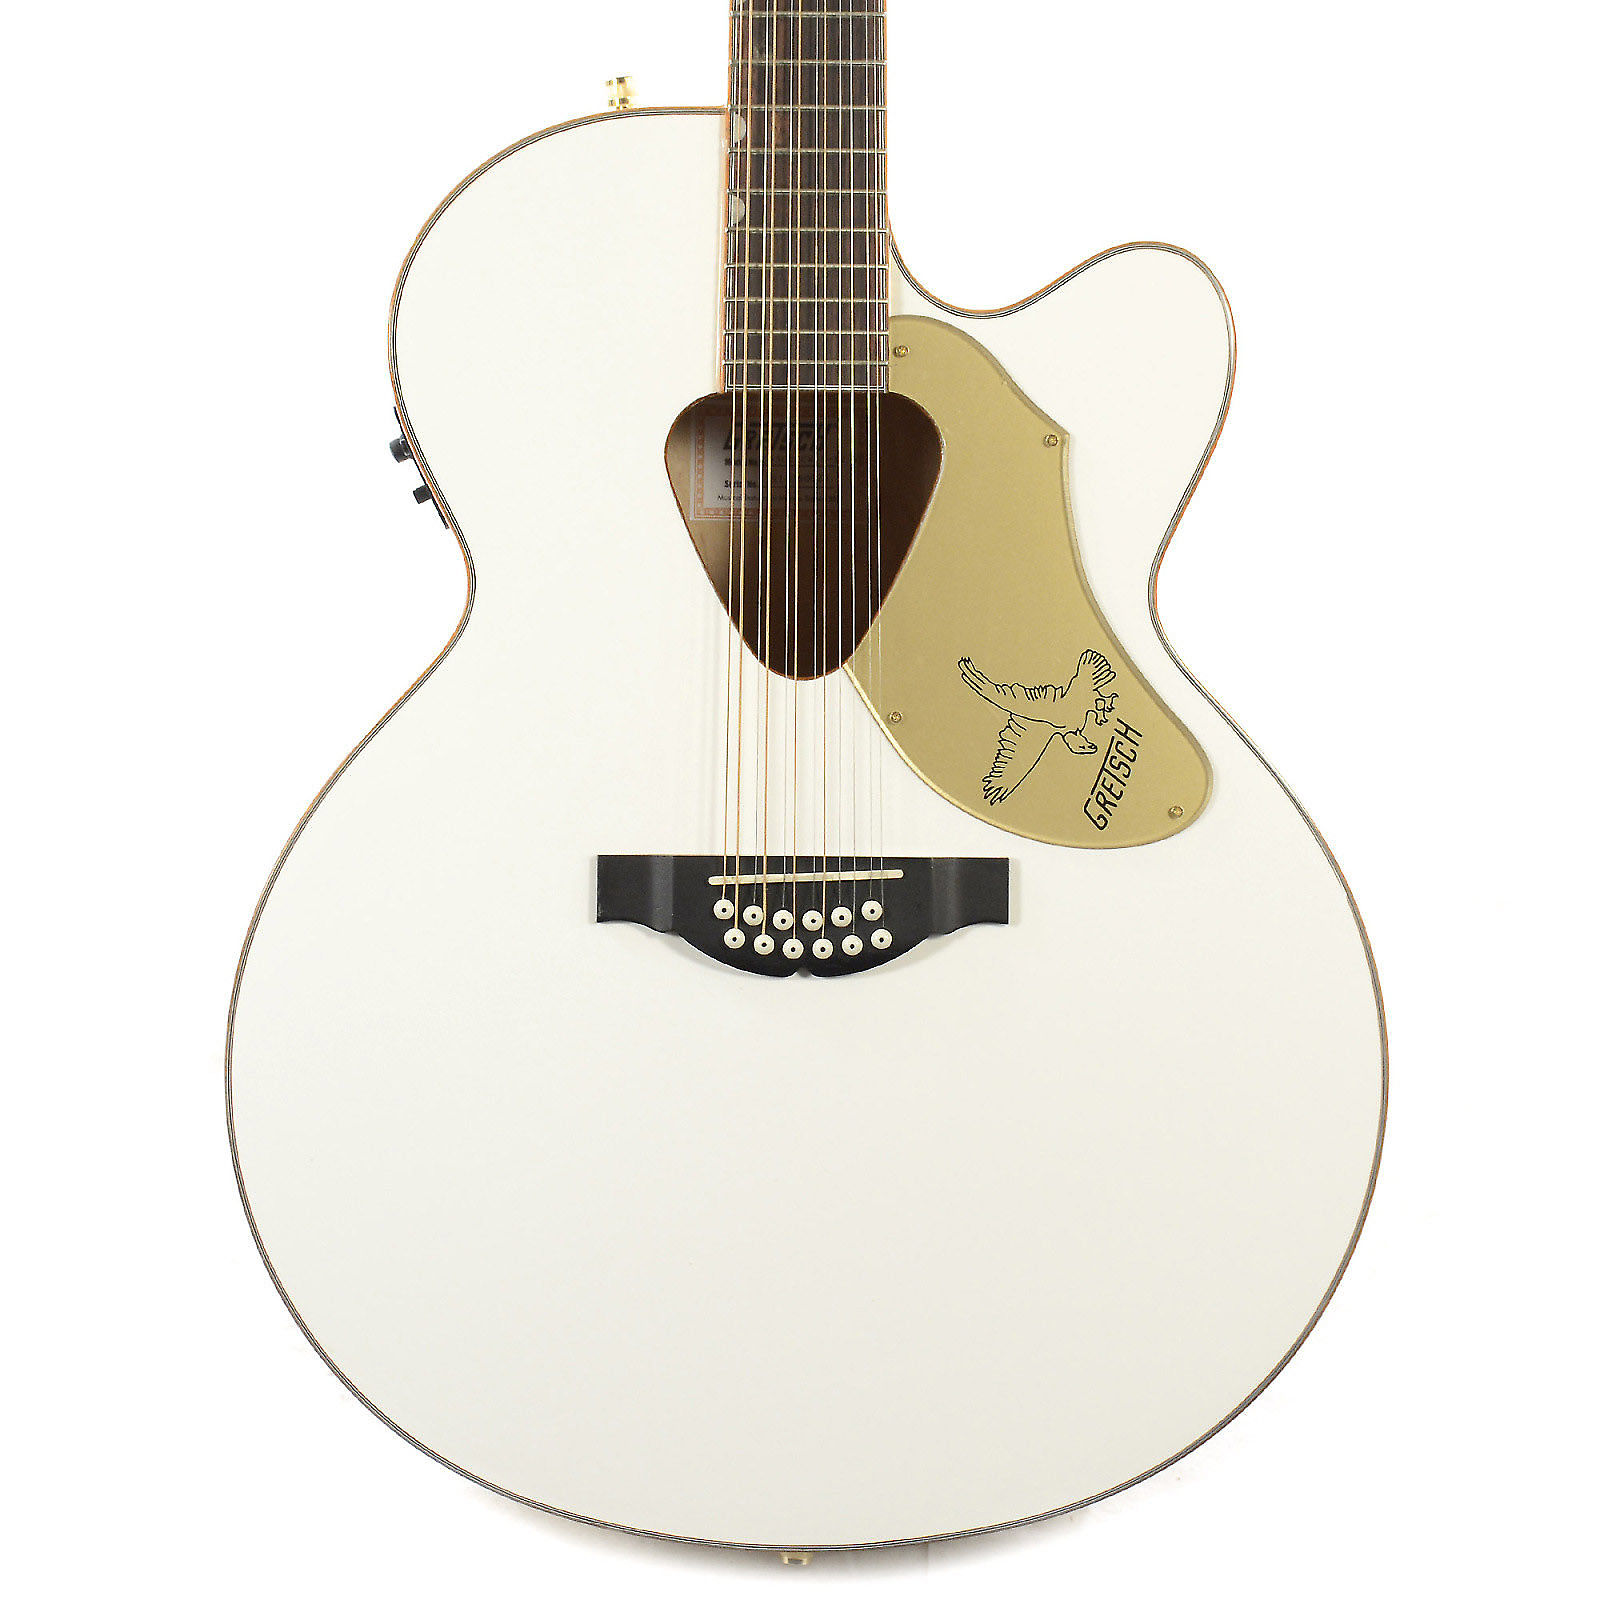 Gretsch G5022CWFE-12 Rancher Falcon Jumbo 12-String Cutaway with Fishman  Pickup System White 2016 | Reverb